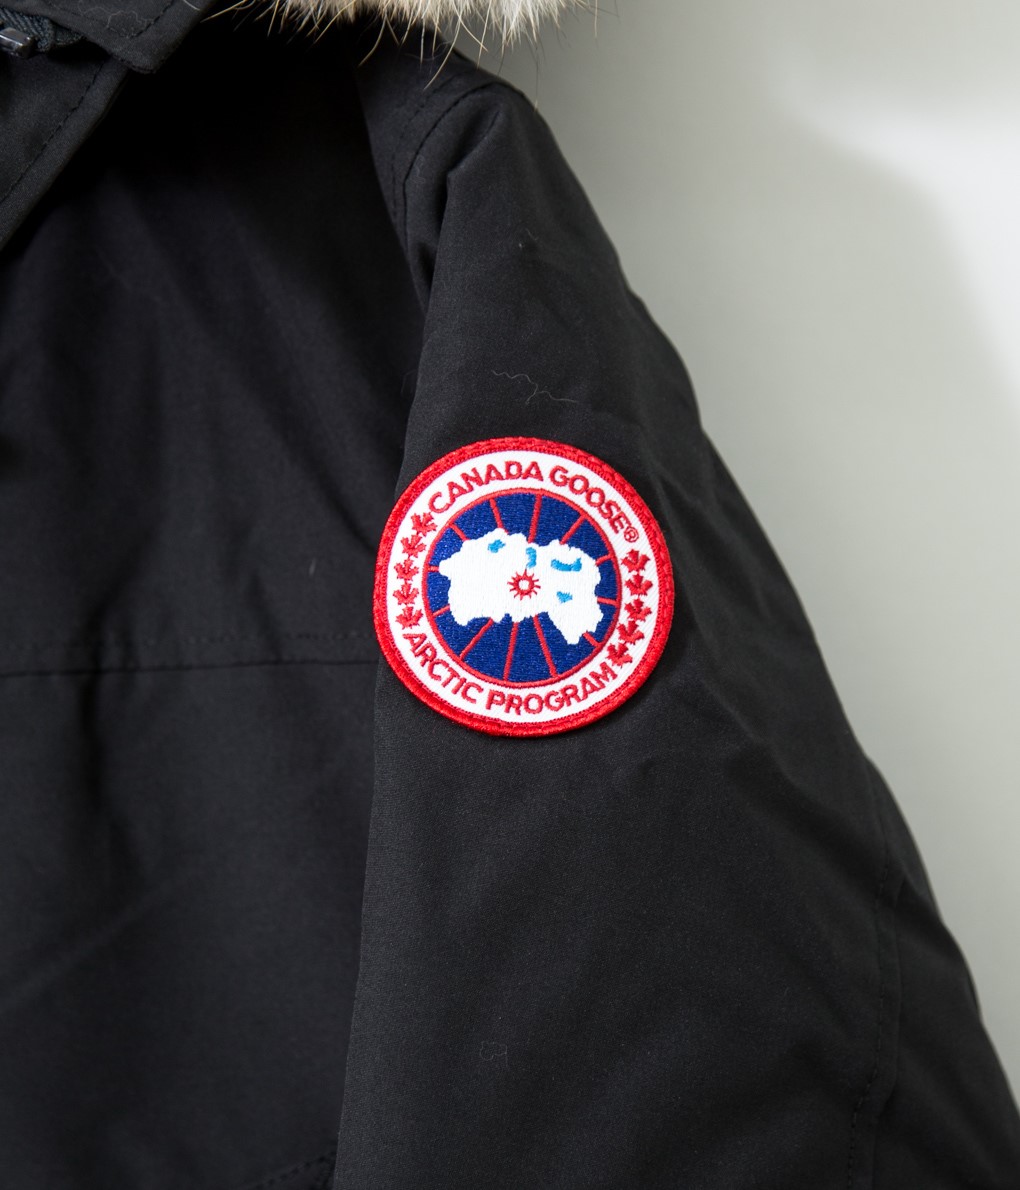 New Arrival “CANADA GOOSE” 2020AW ② | well-made by MAIDENS SHOP